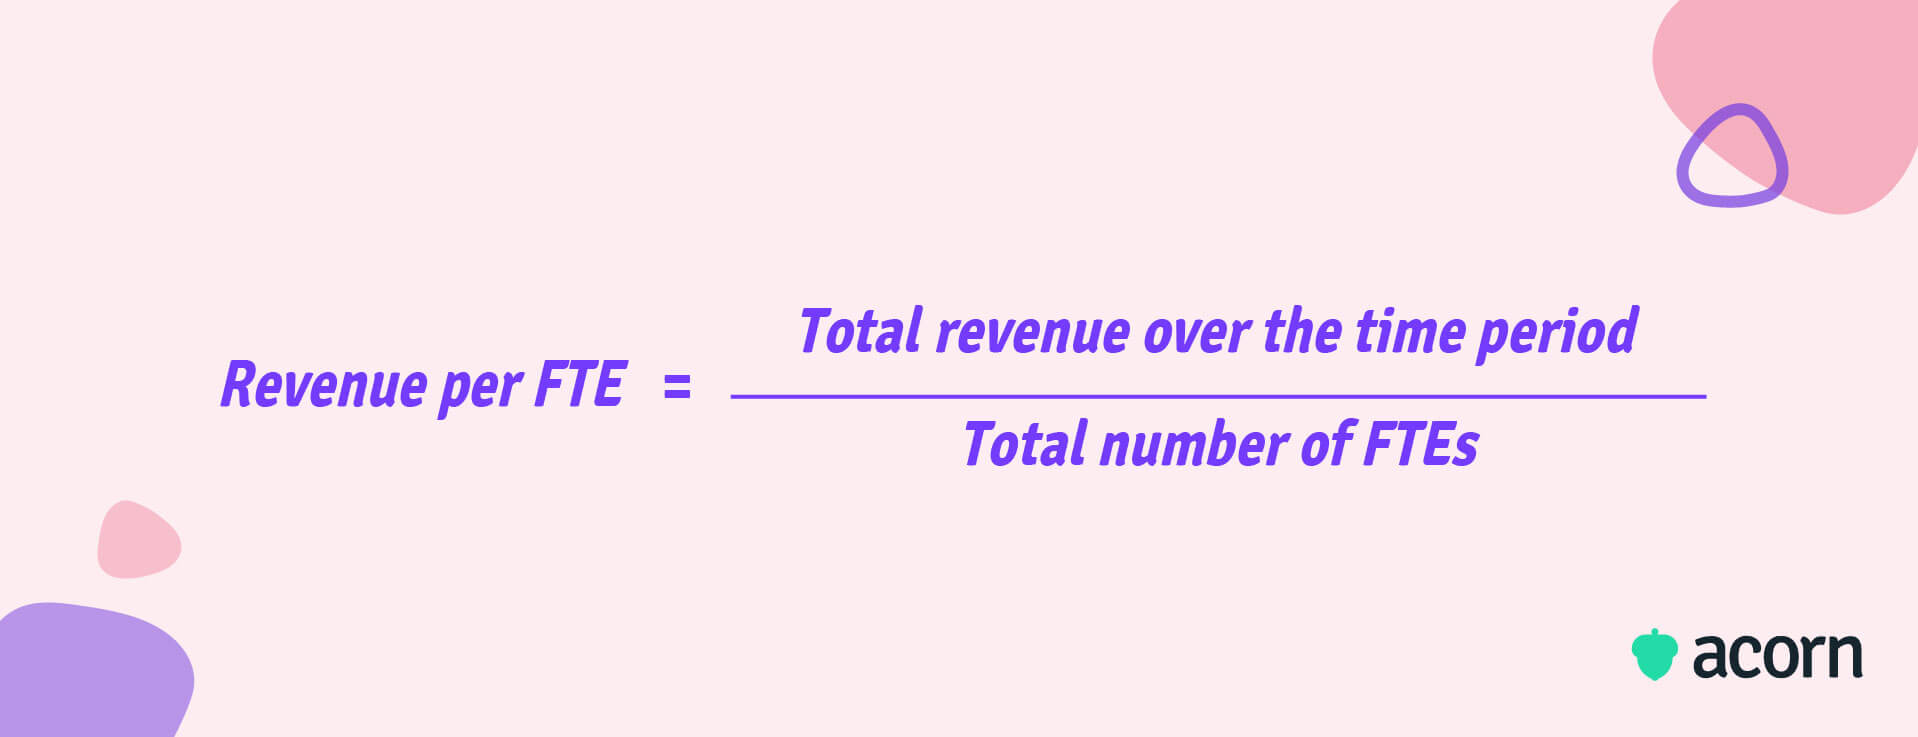 Revenue per FTE formula = Total revenue over the time period/Total number of FTEs for the time period